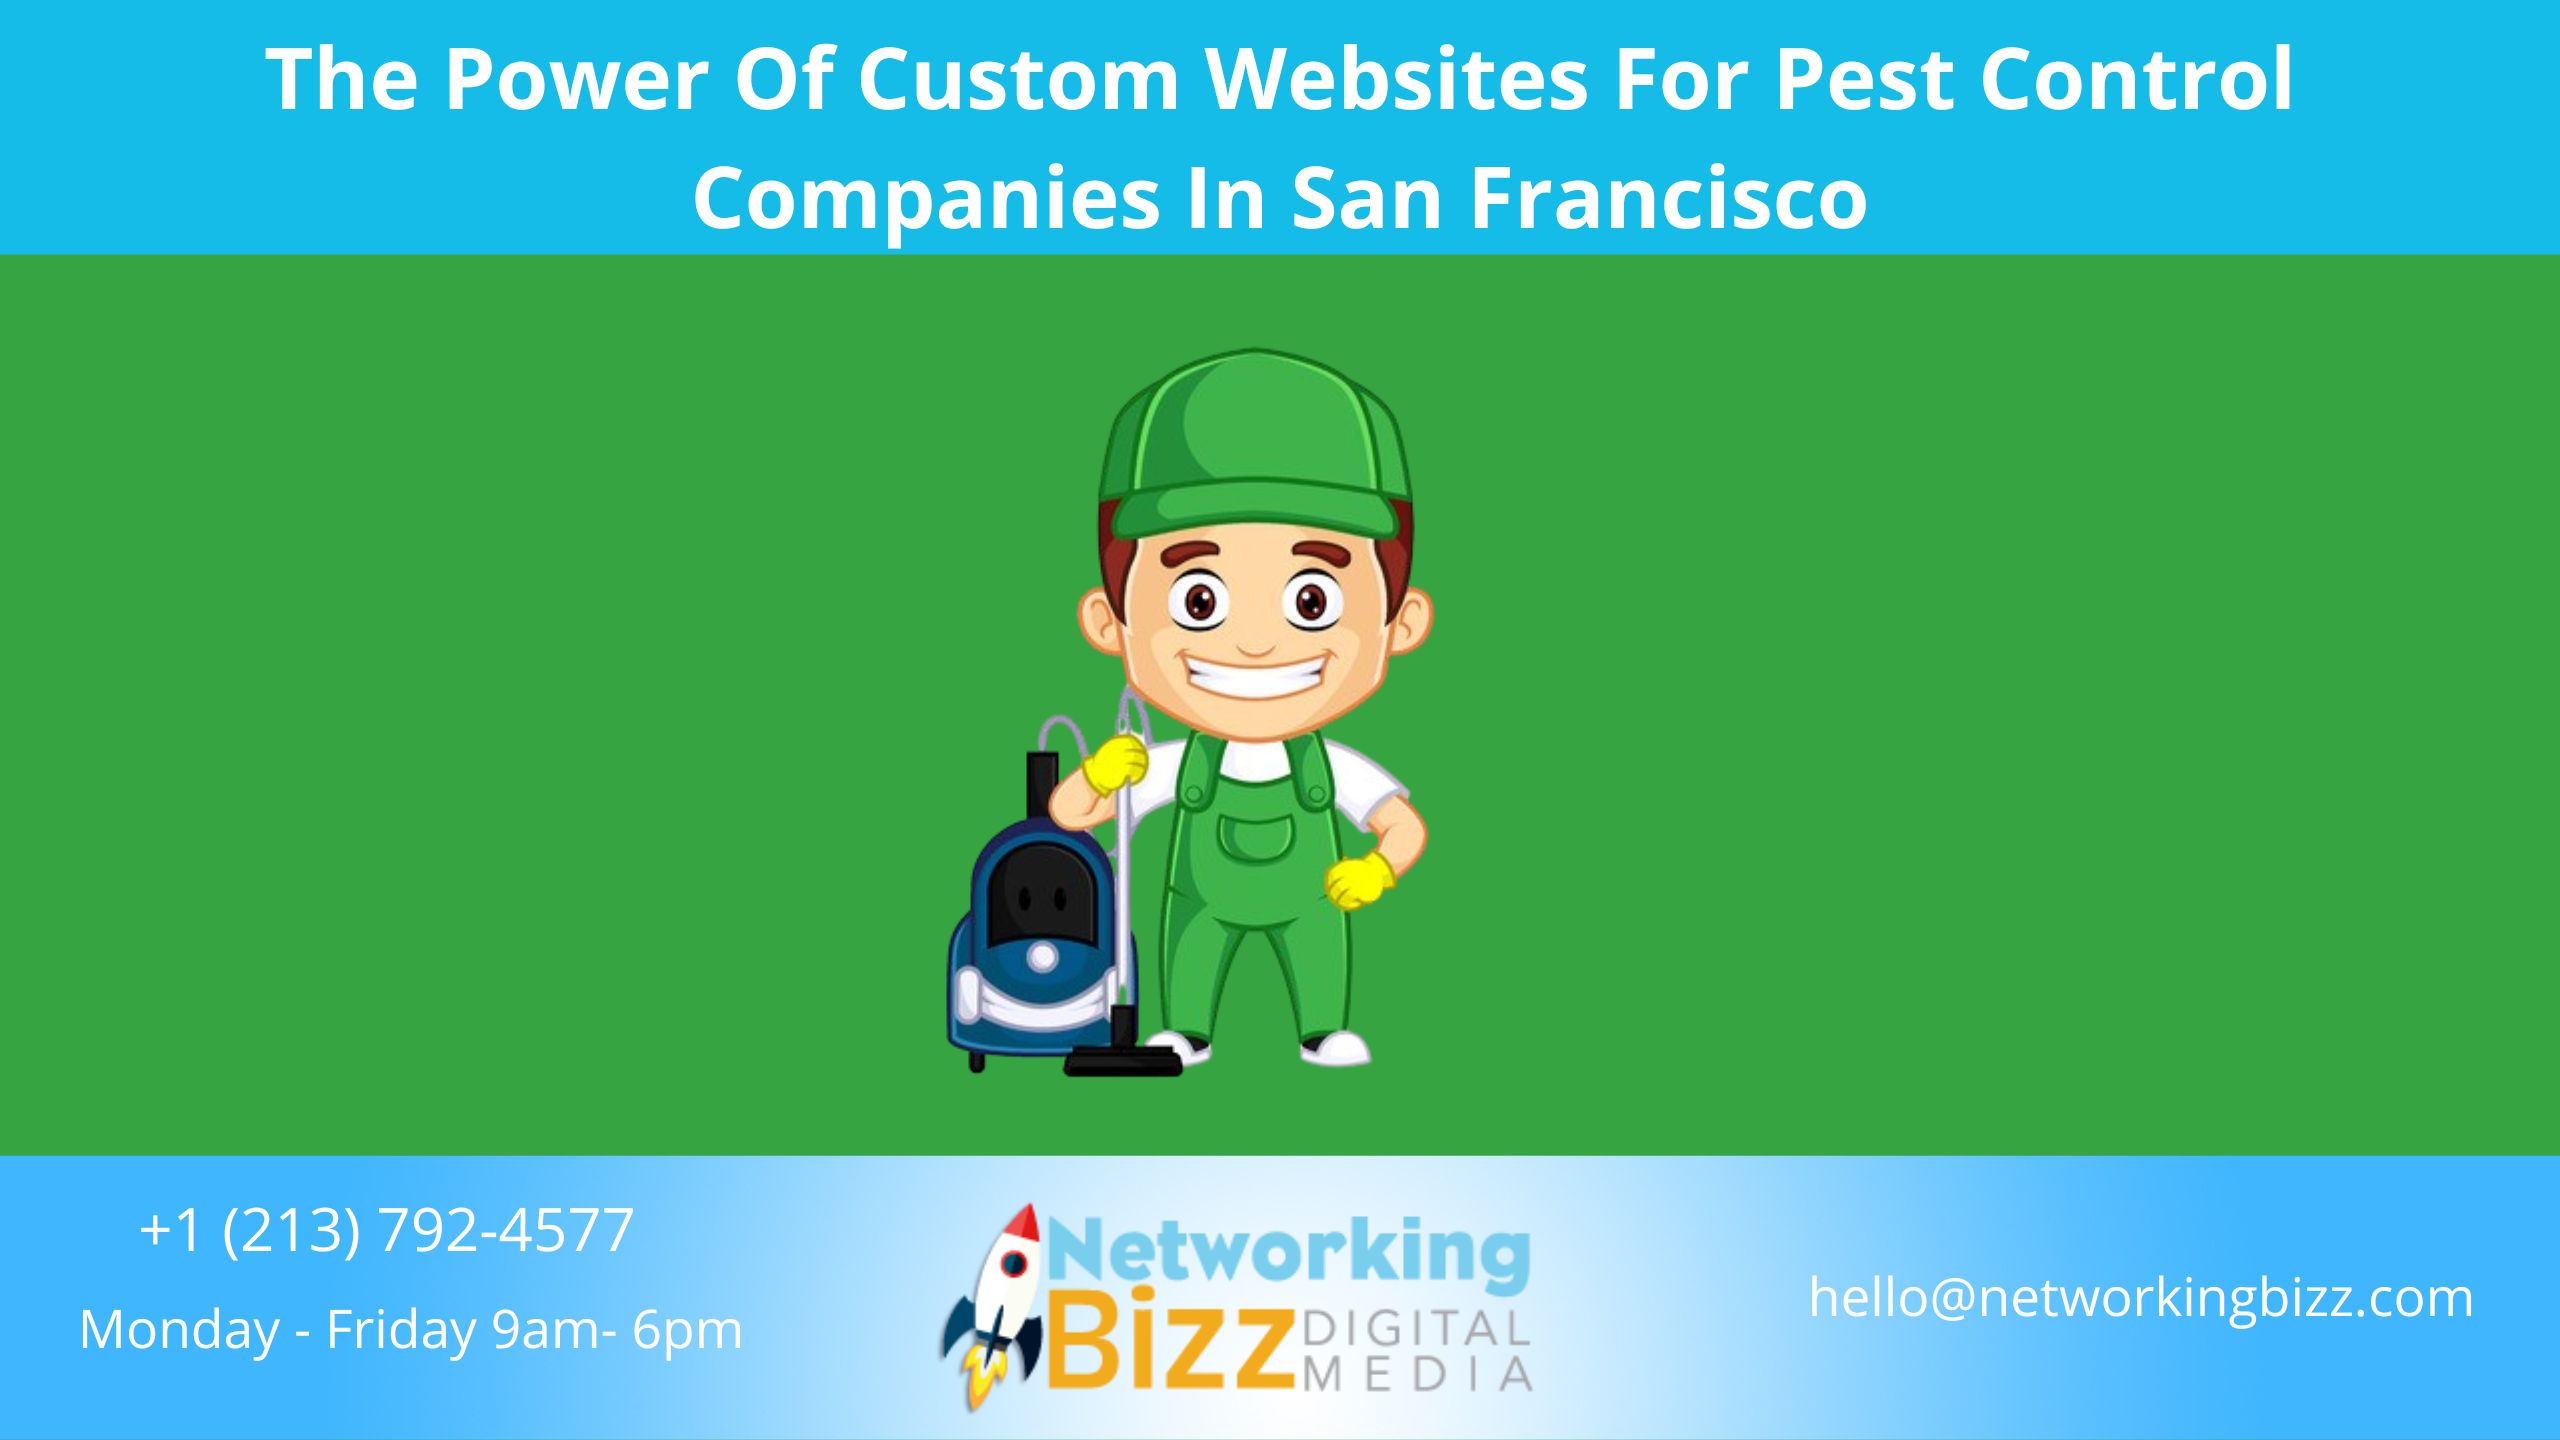 The Power Of Custom Websites For Pest Control Companies In San Francisco 